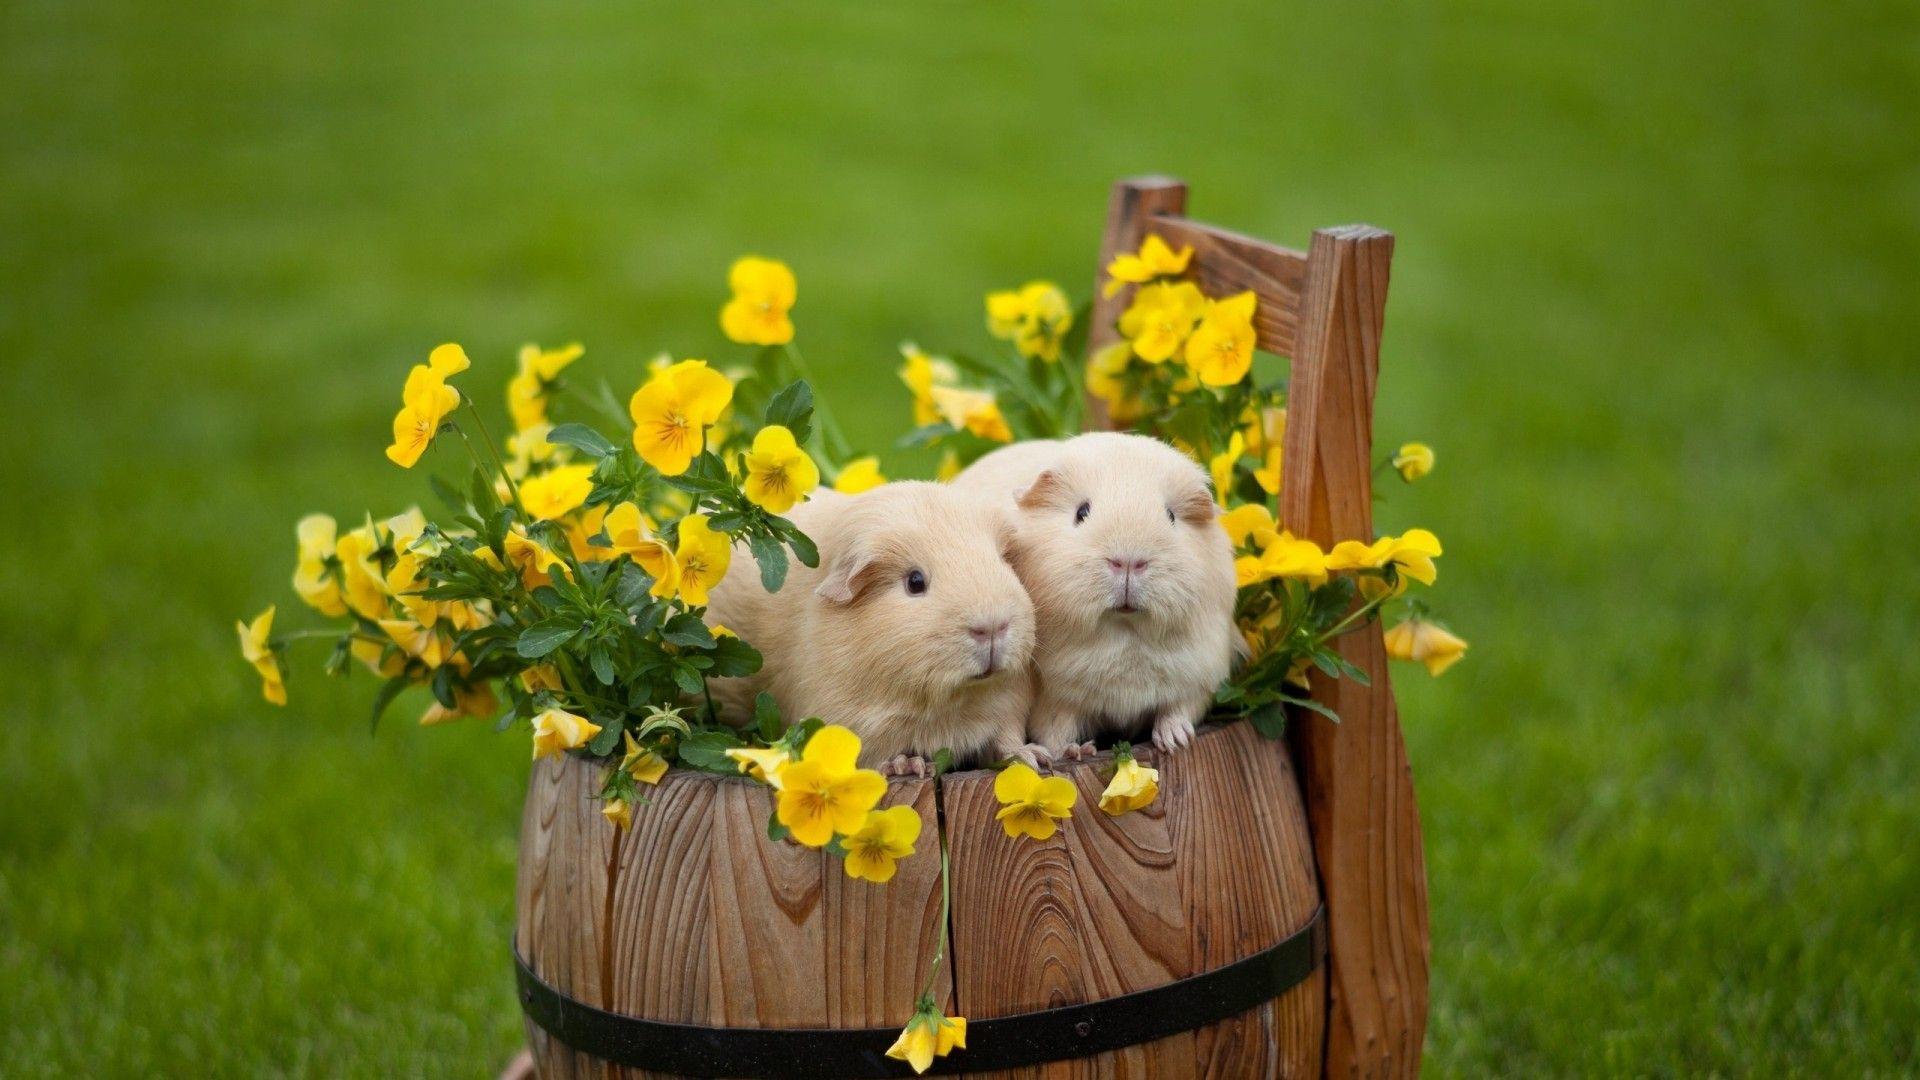 Funny Hamster wallpaper Android Apps on Google Play 1024×768 Cute